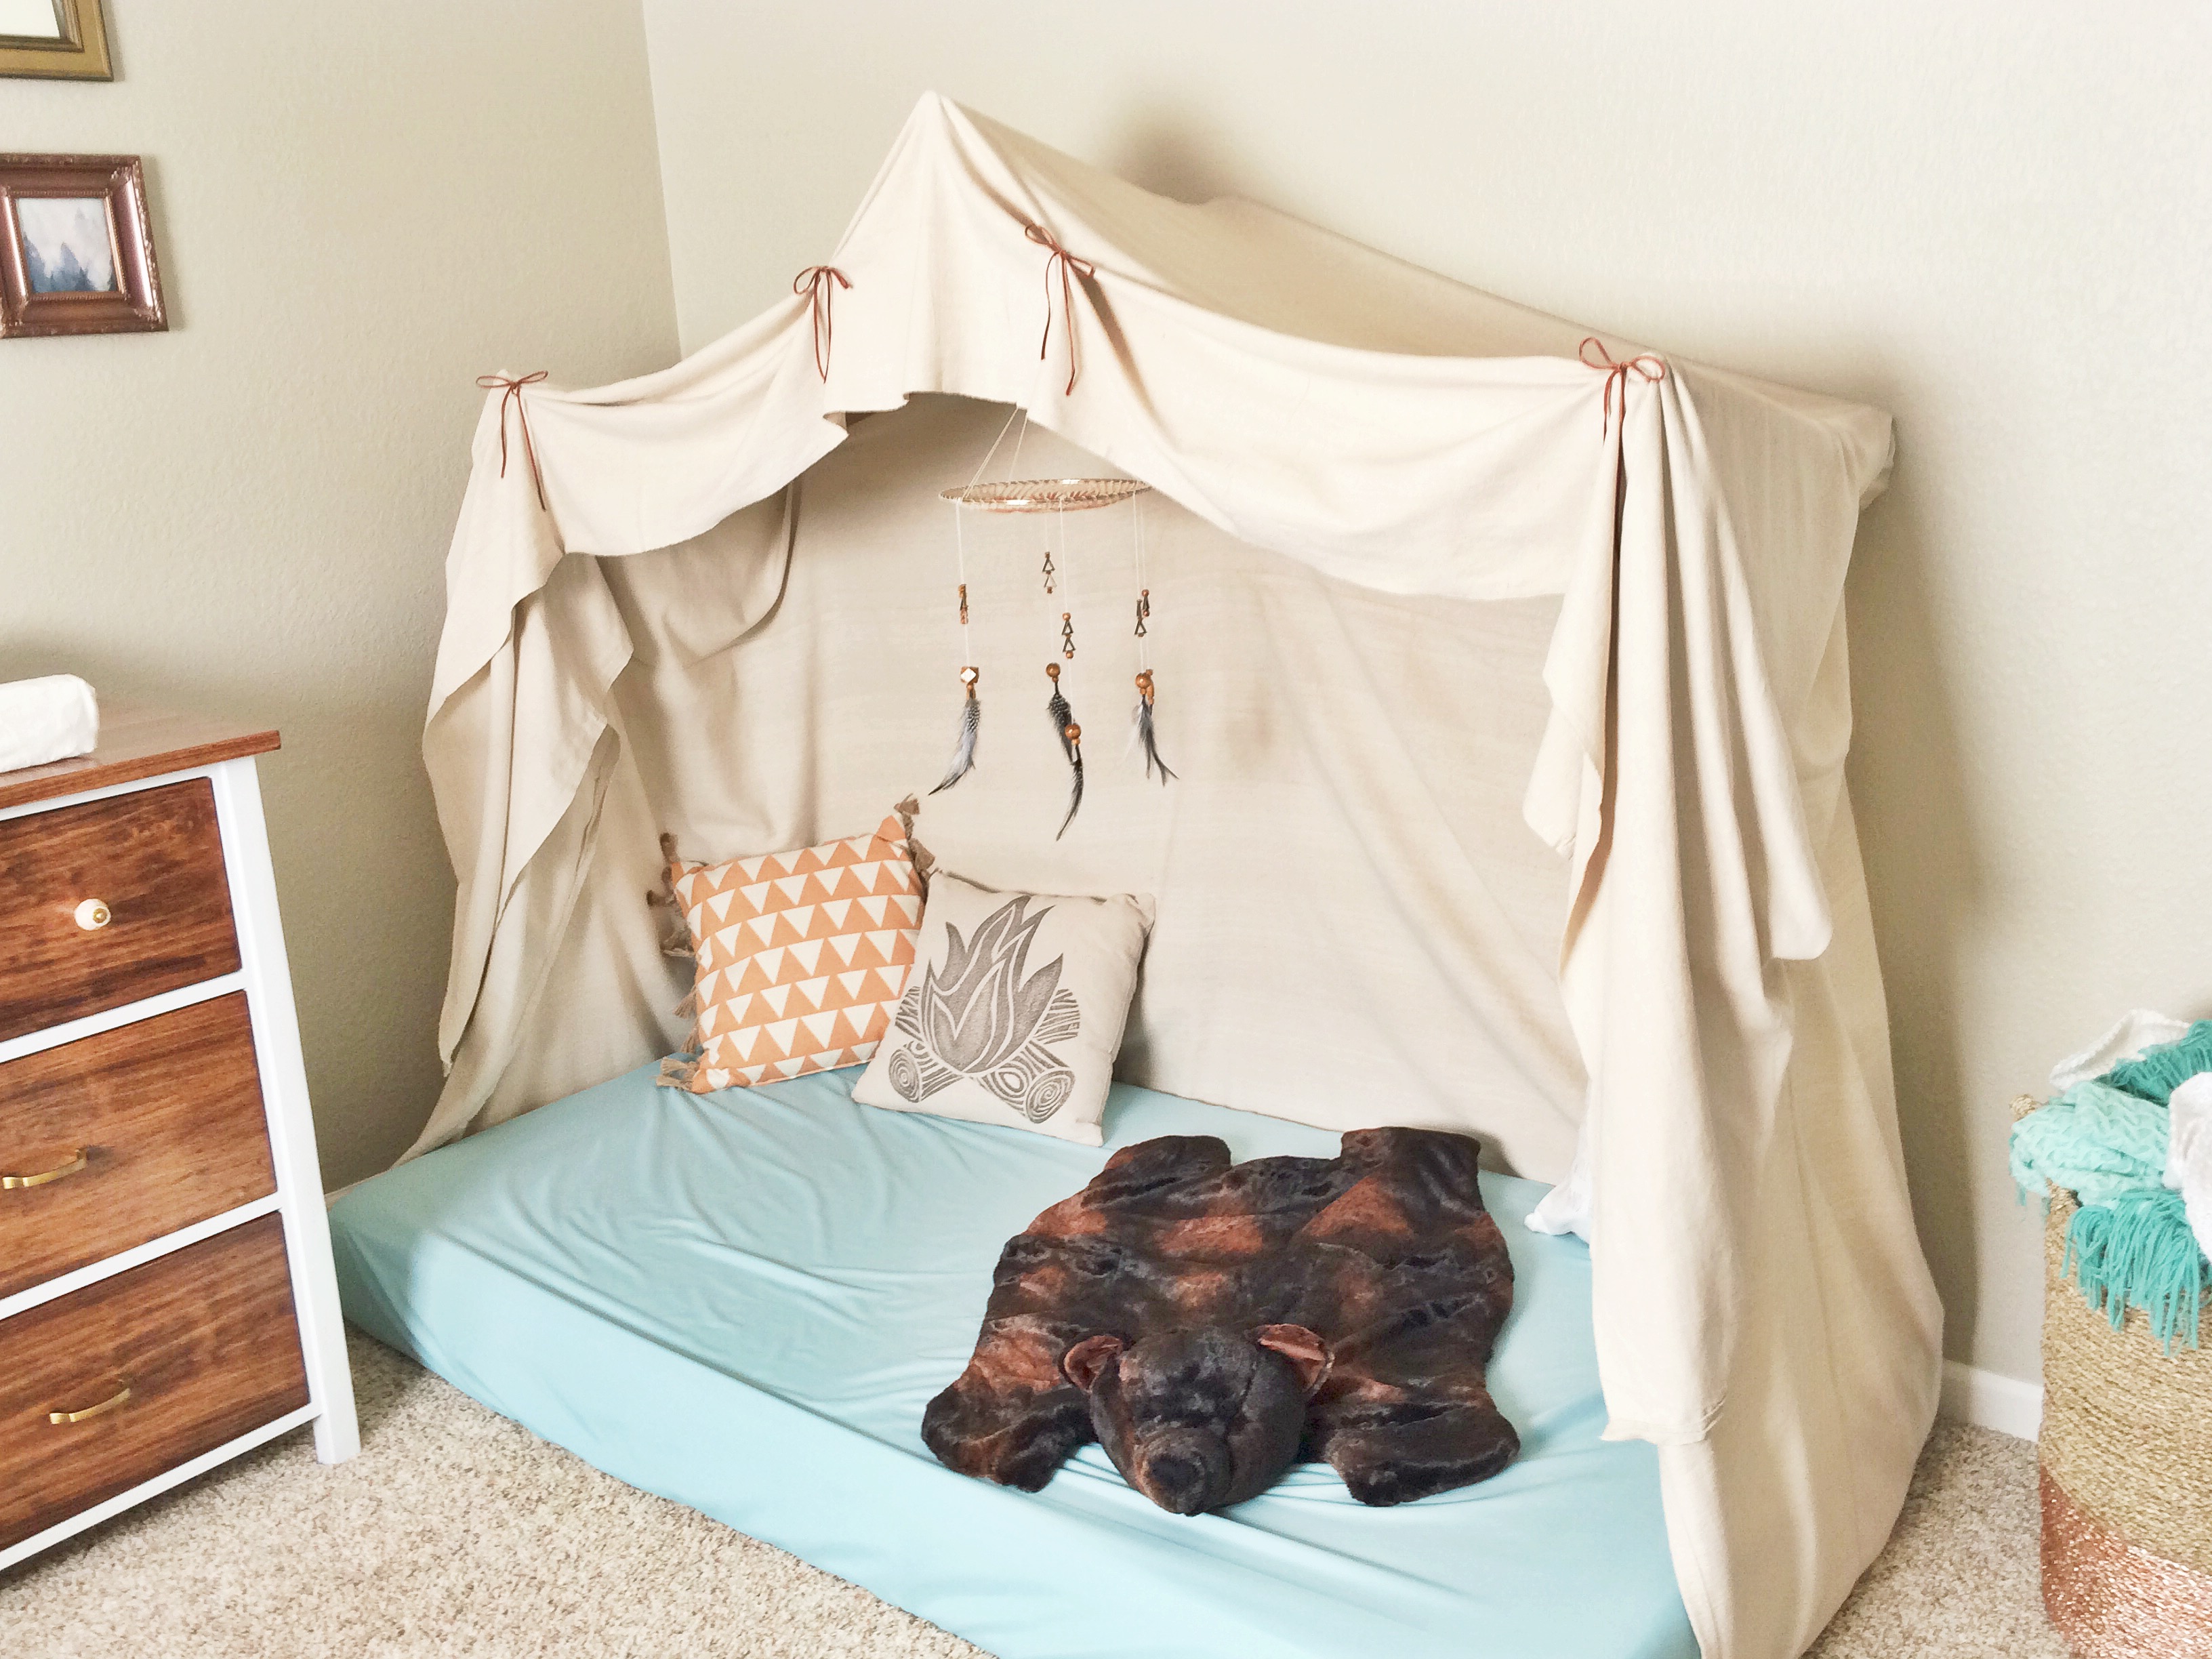 Montessori-Style Floor Bed in this Bohemian Camp Themed Nursery